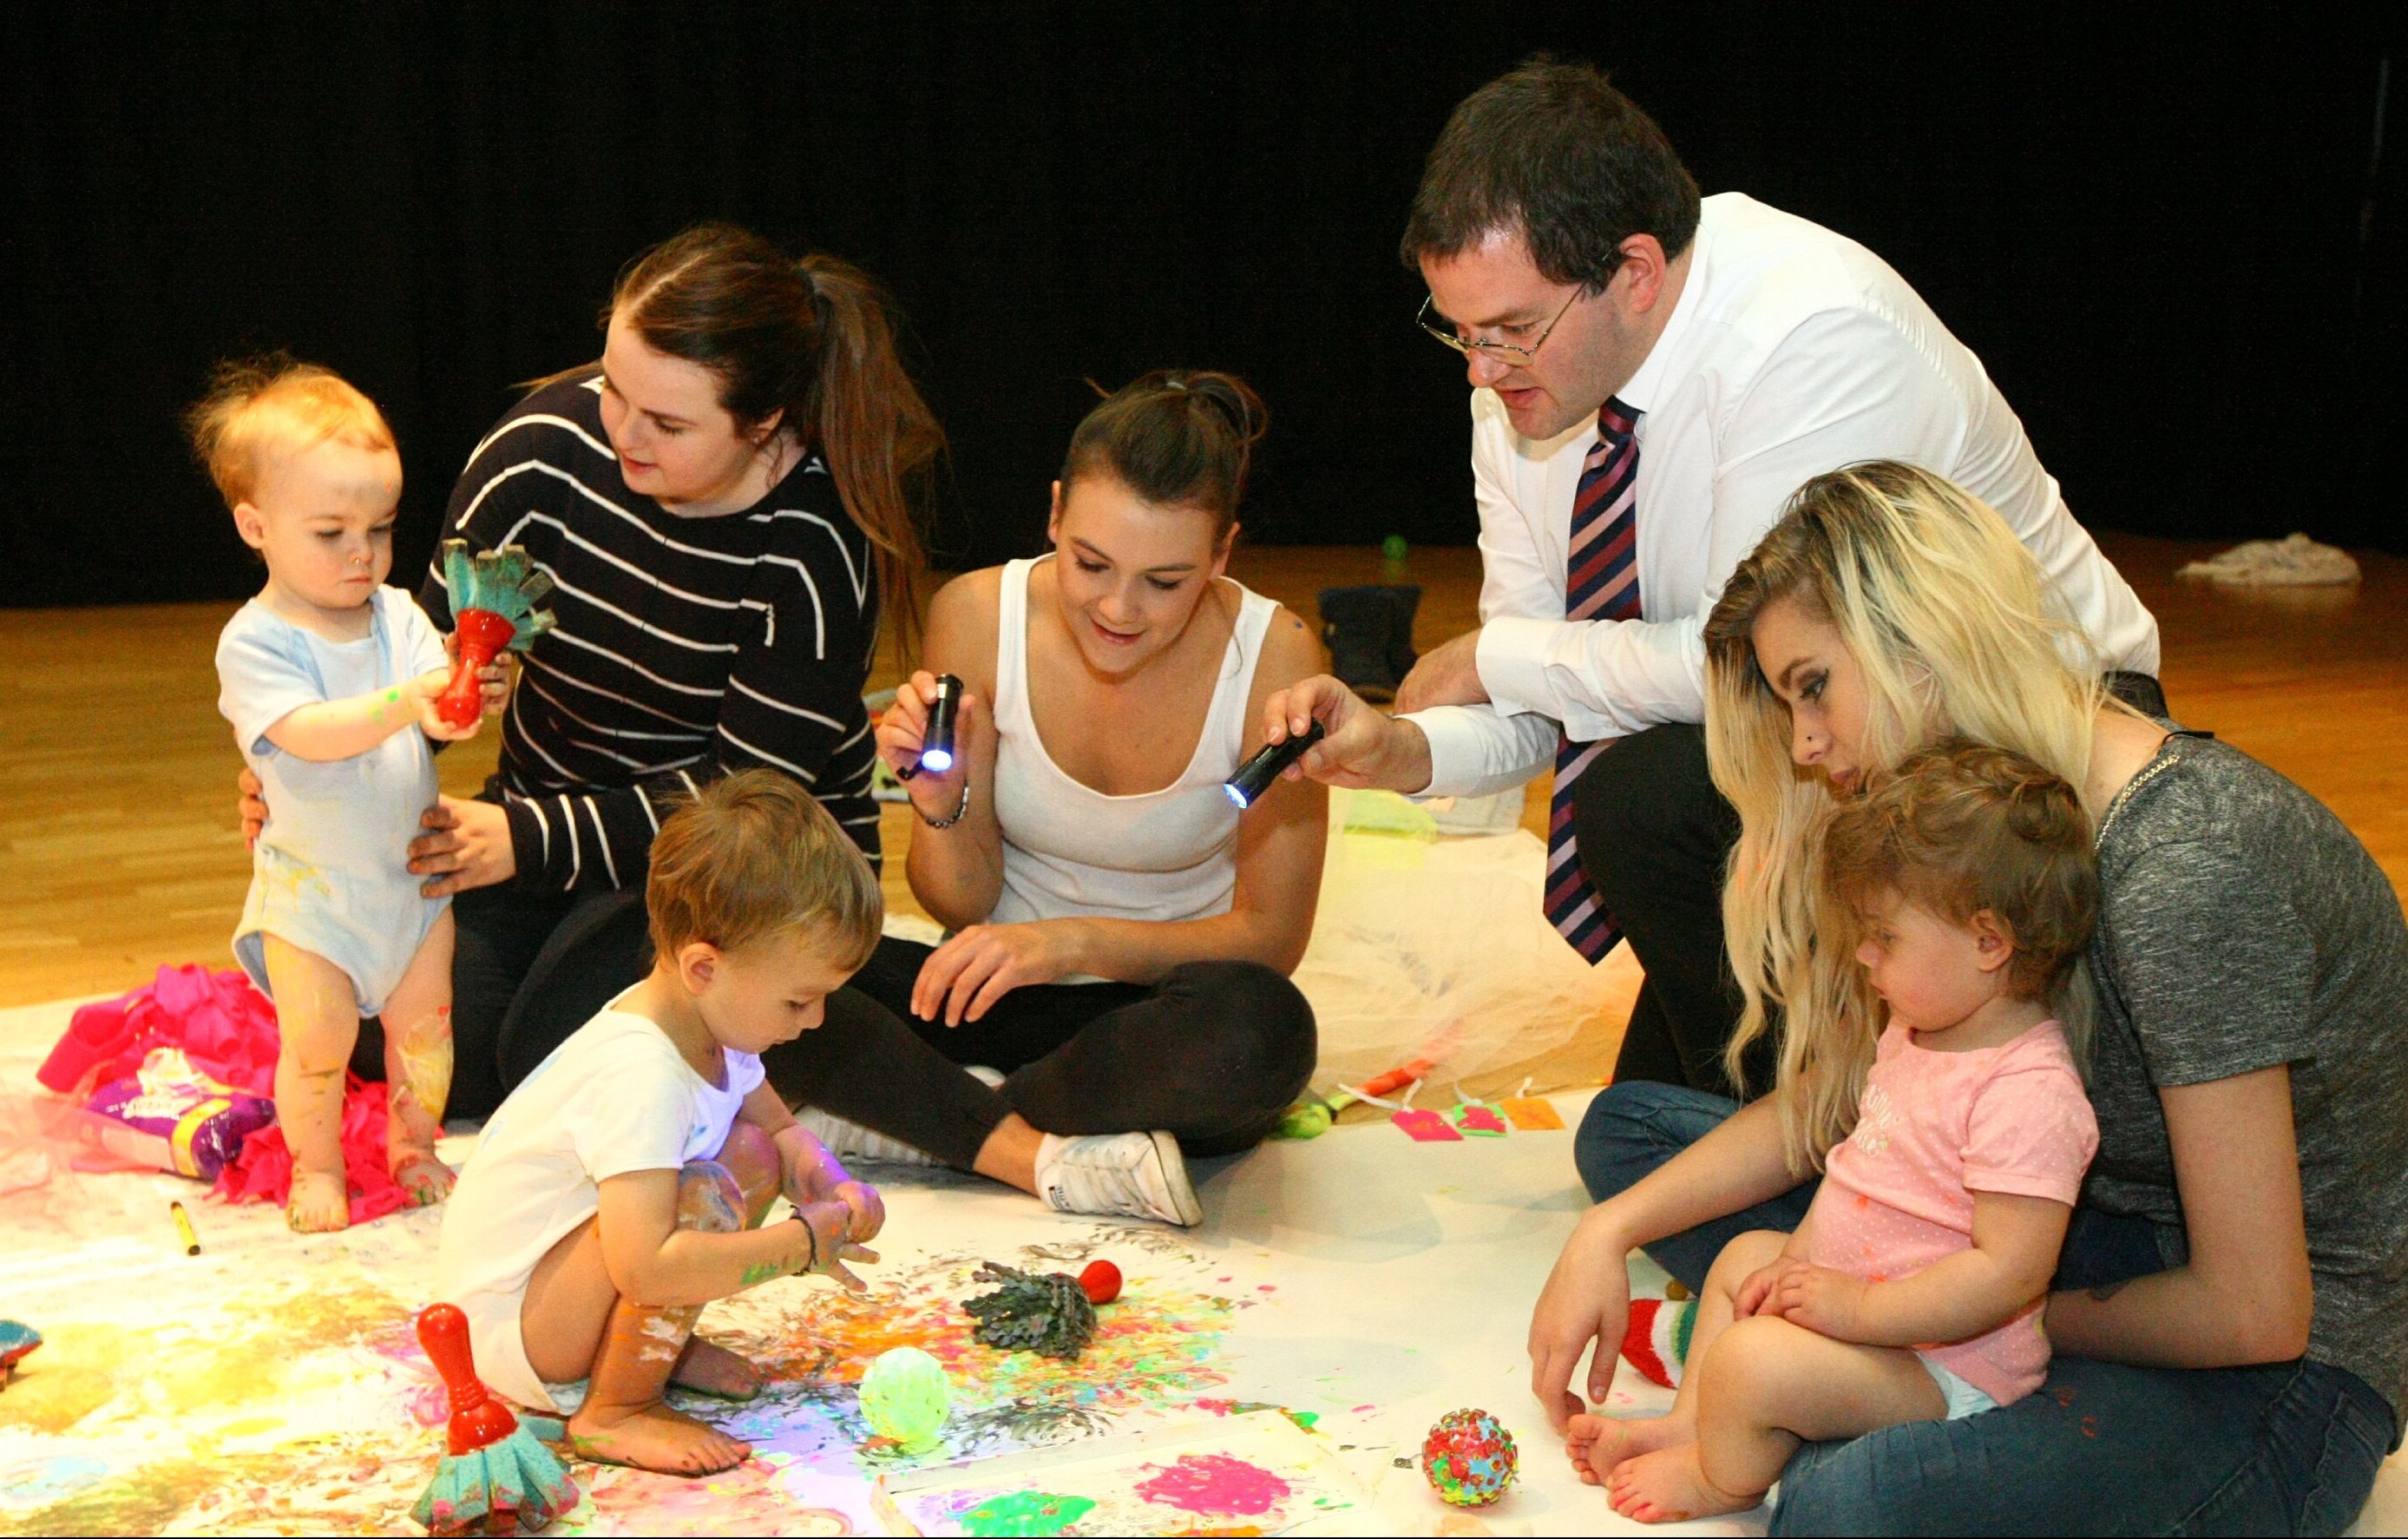 Mark McDonald - Minister for Childcare and Early Years - with some of the 'Expecting Something' group during his visit at the Lochgelly Centre.